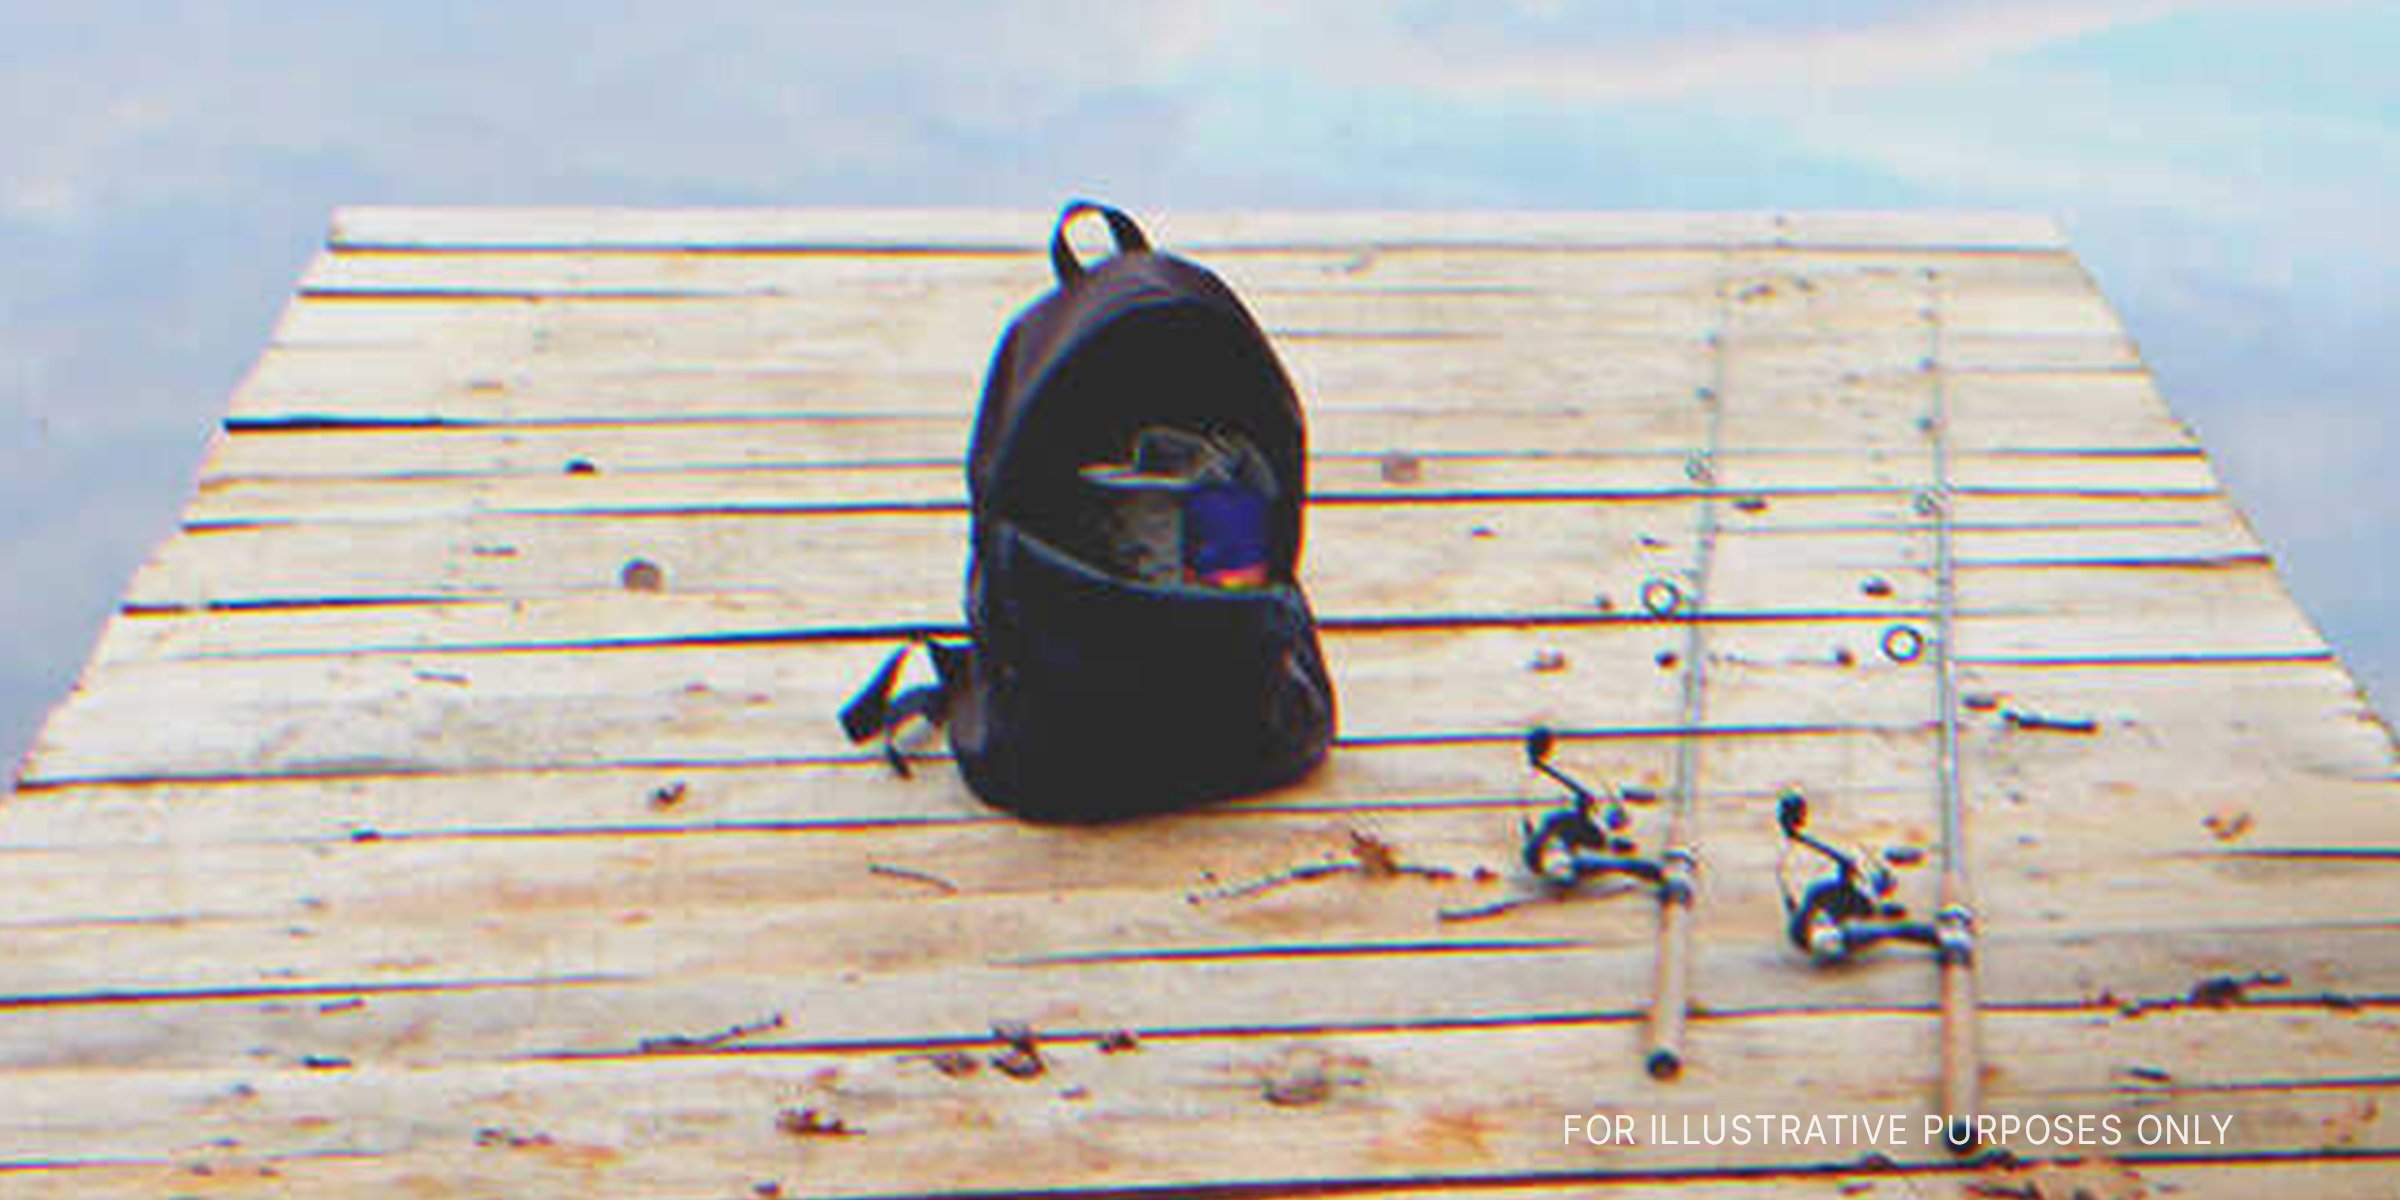 Fishing Rods And Backpack On Wooden Plank. | Source: Shutterstock